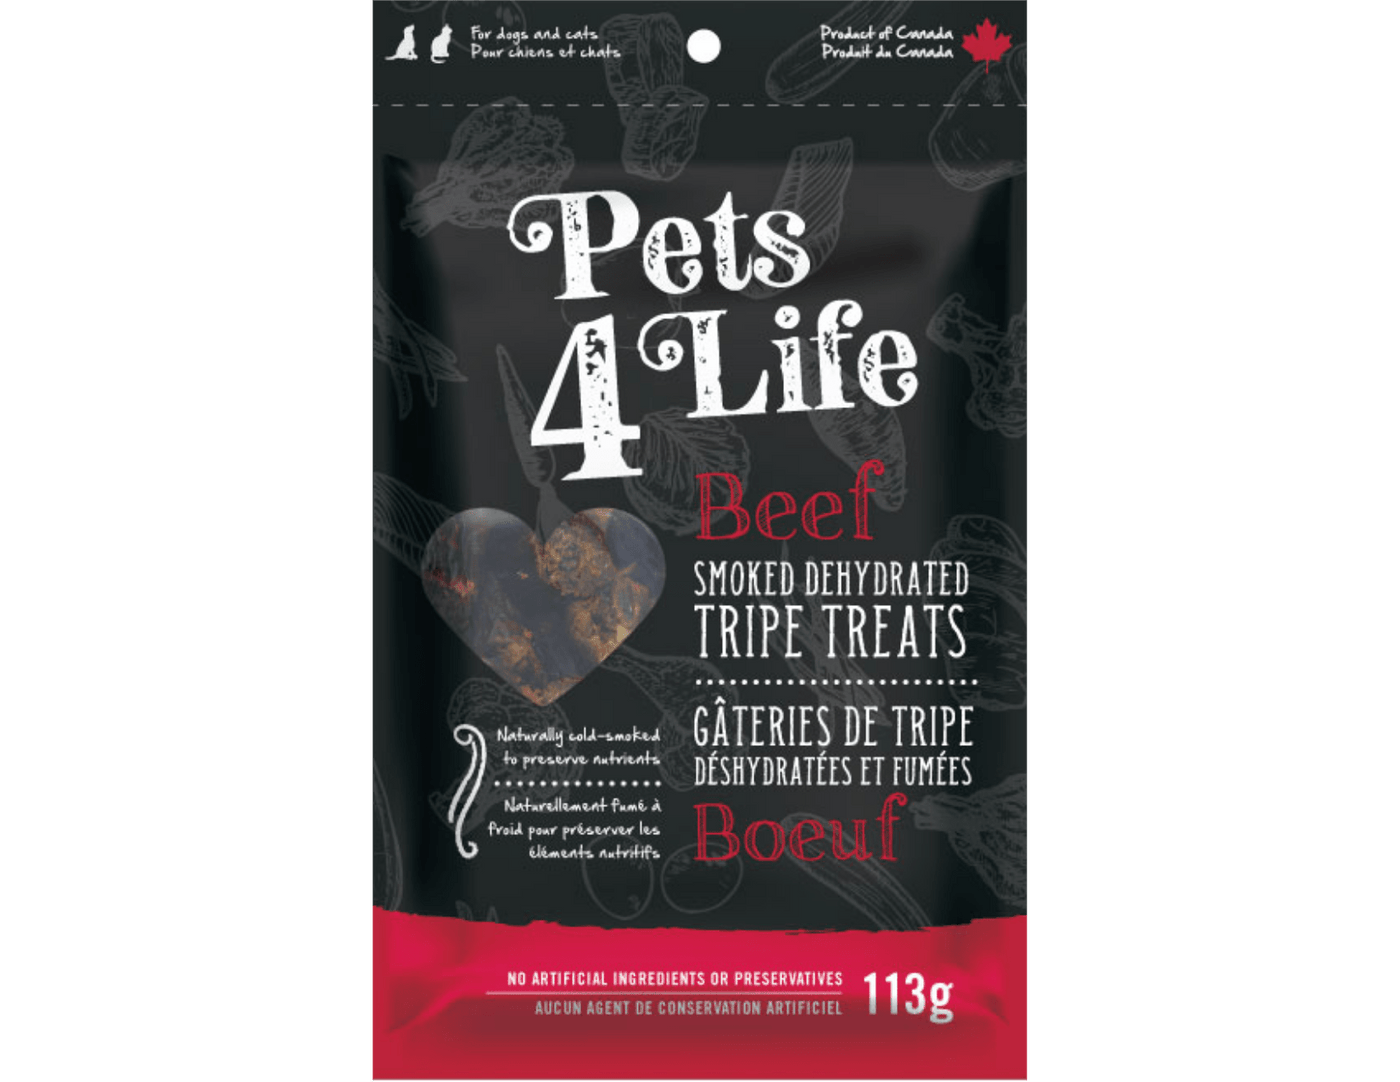 Beef Smoked Dehydrated Tripes - Dehydrated/Air-Dried Dog Treats - Pets4Life - PetToba-Pet 4 Life